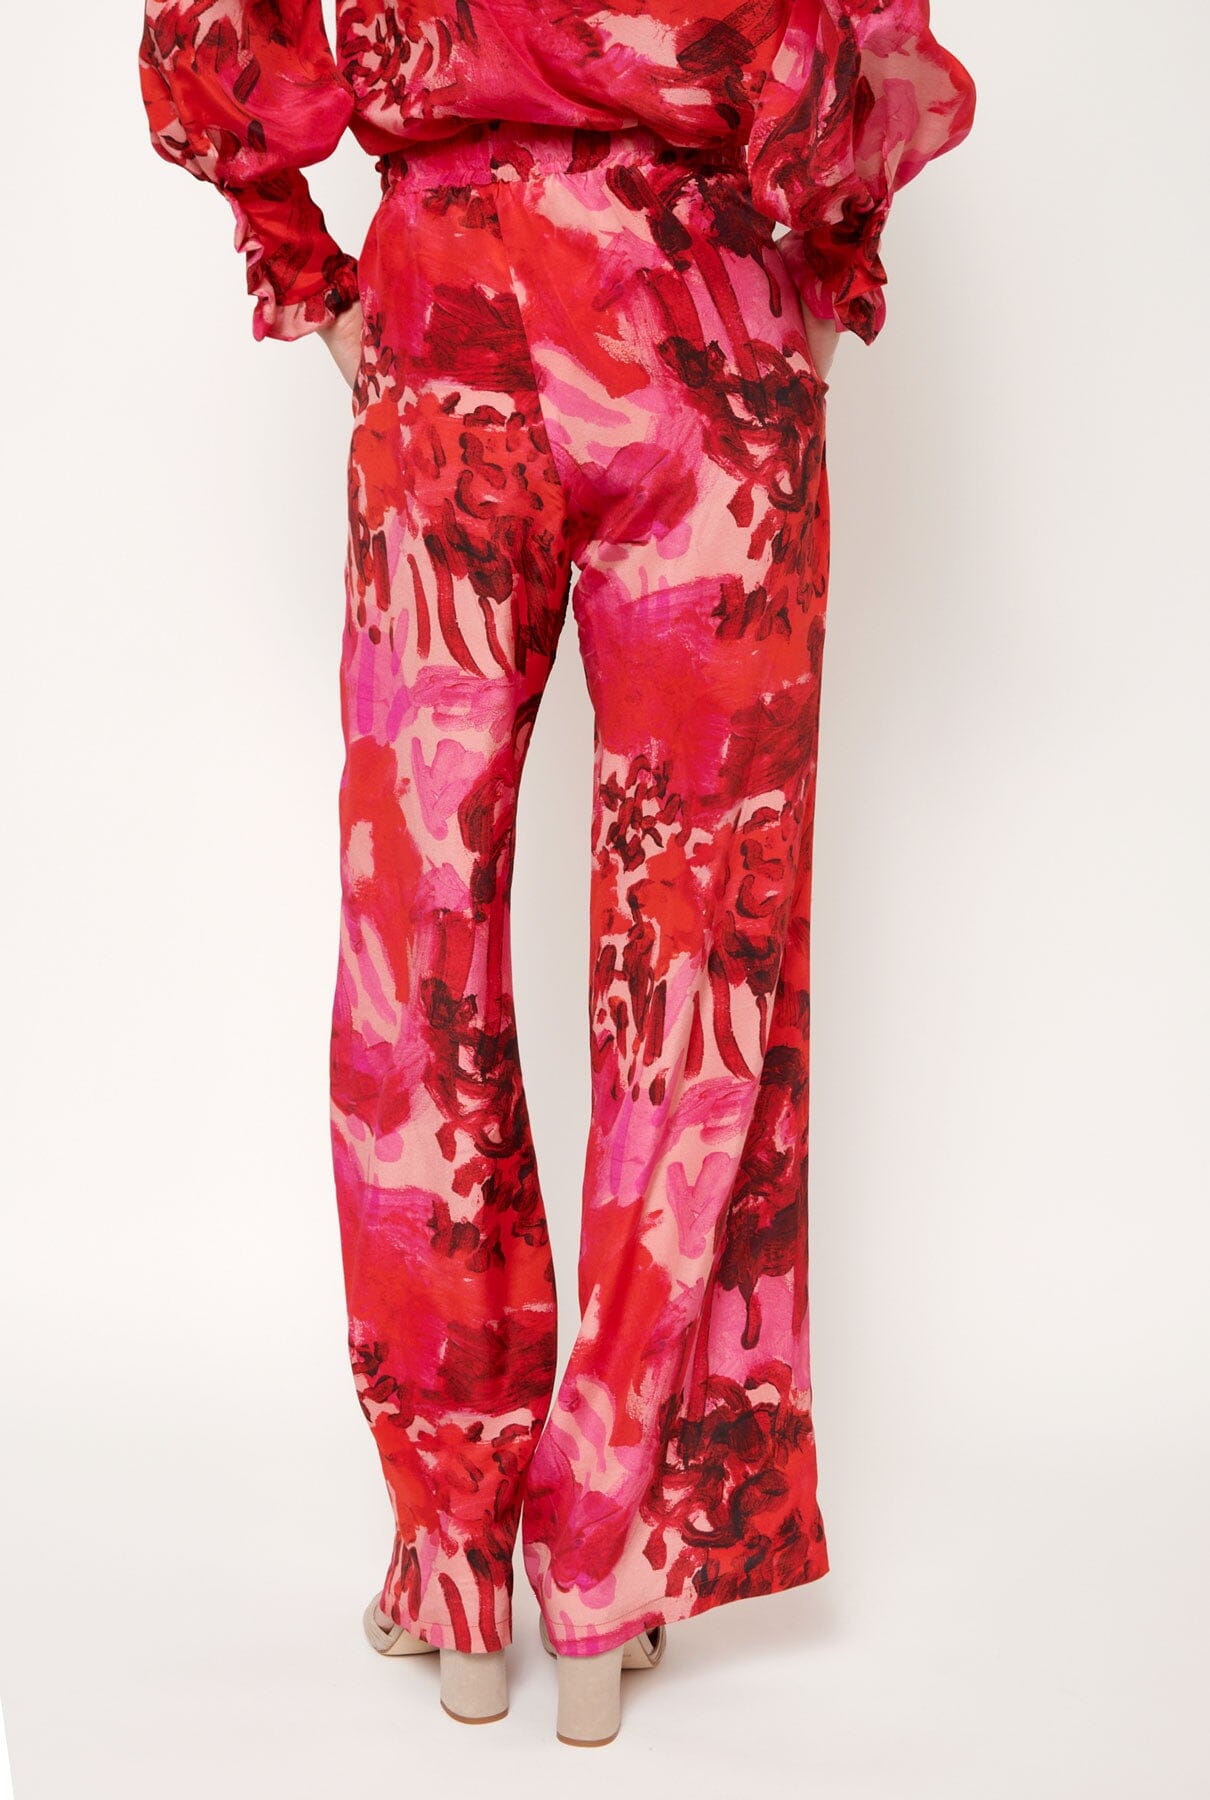 Coral Reef Pants Trousers Arena Martinez 